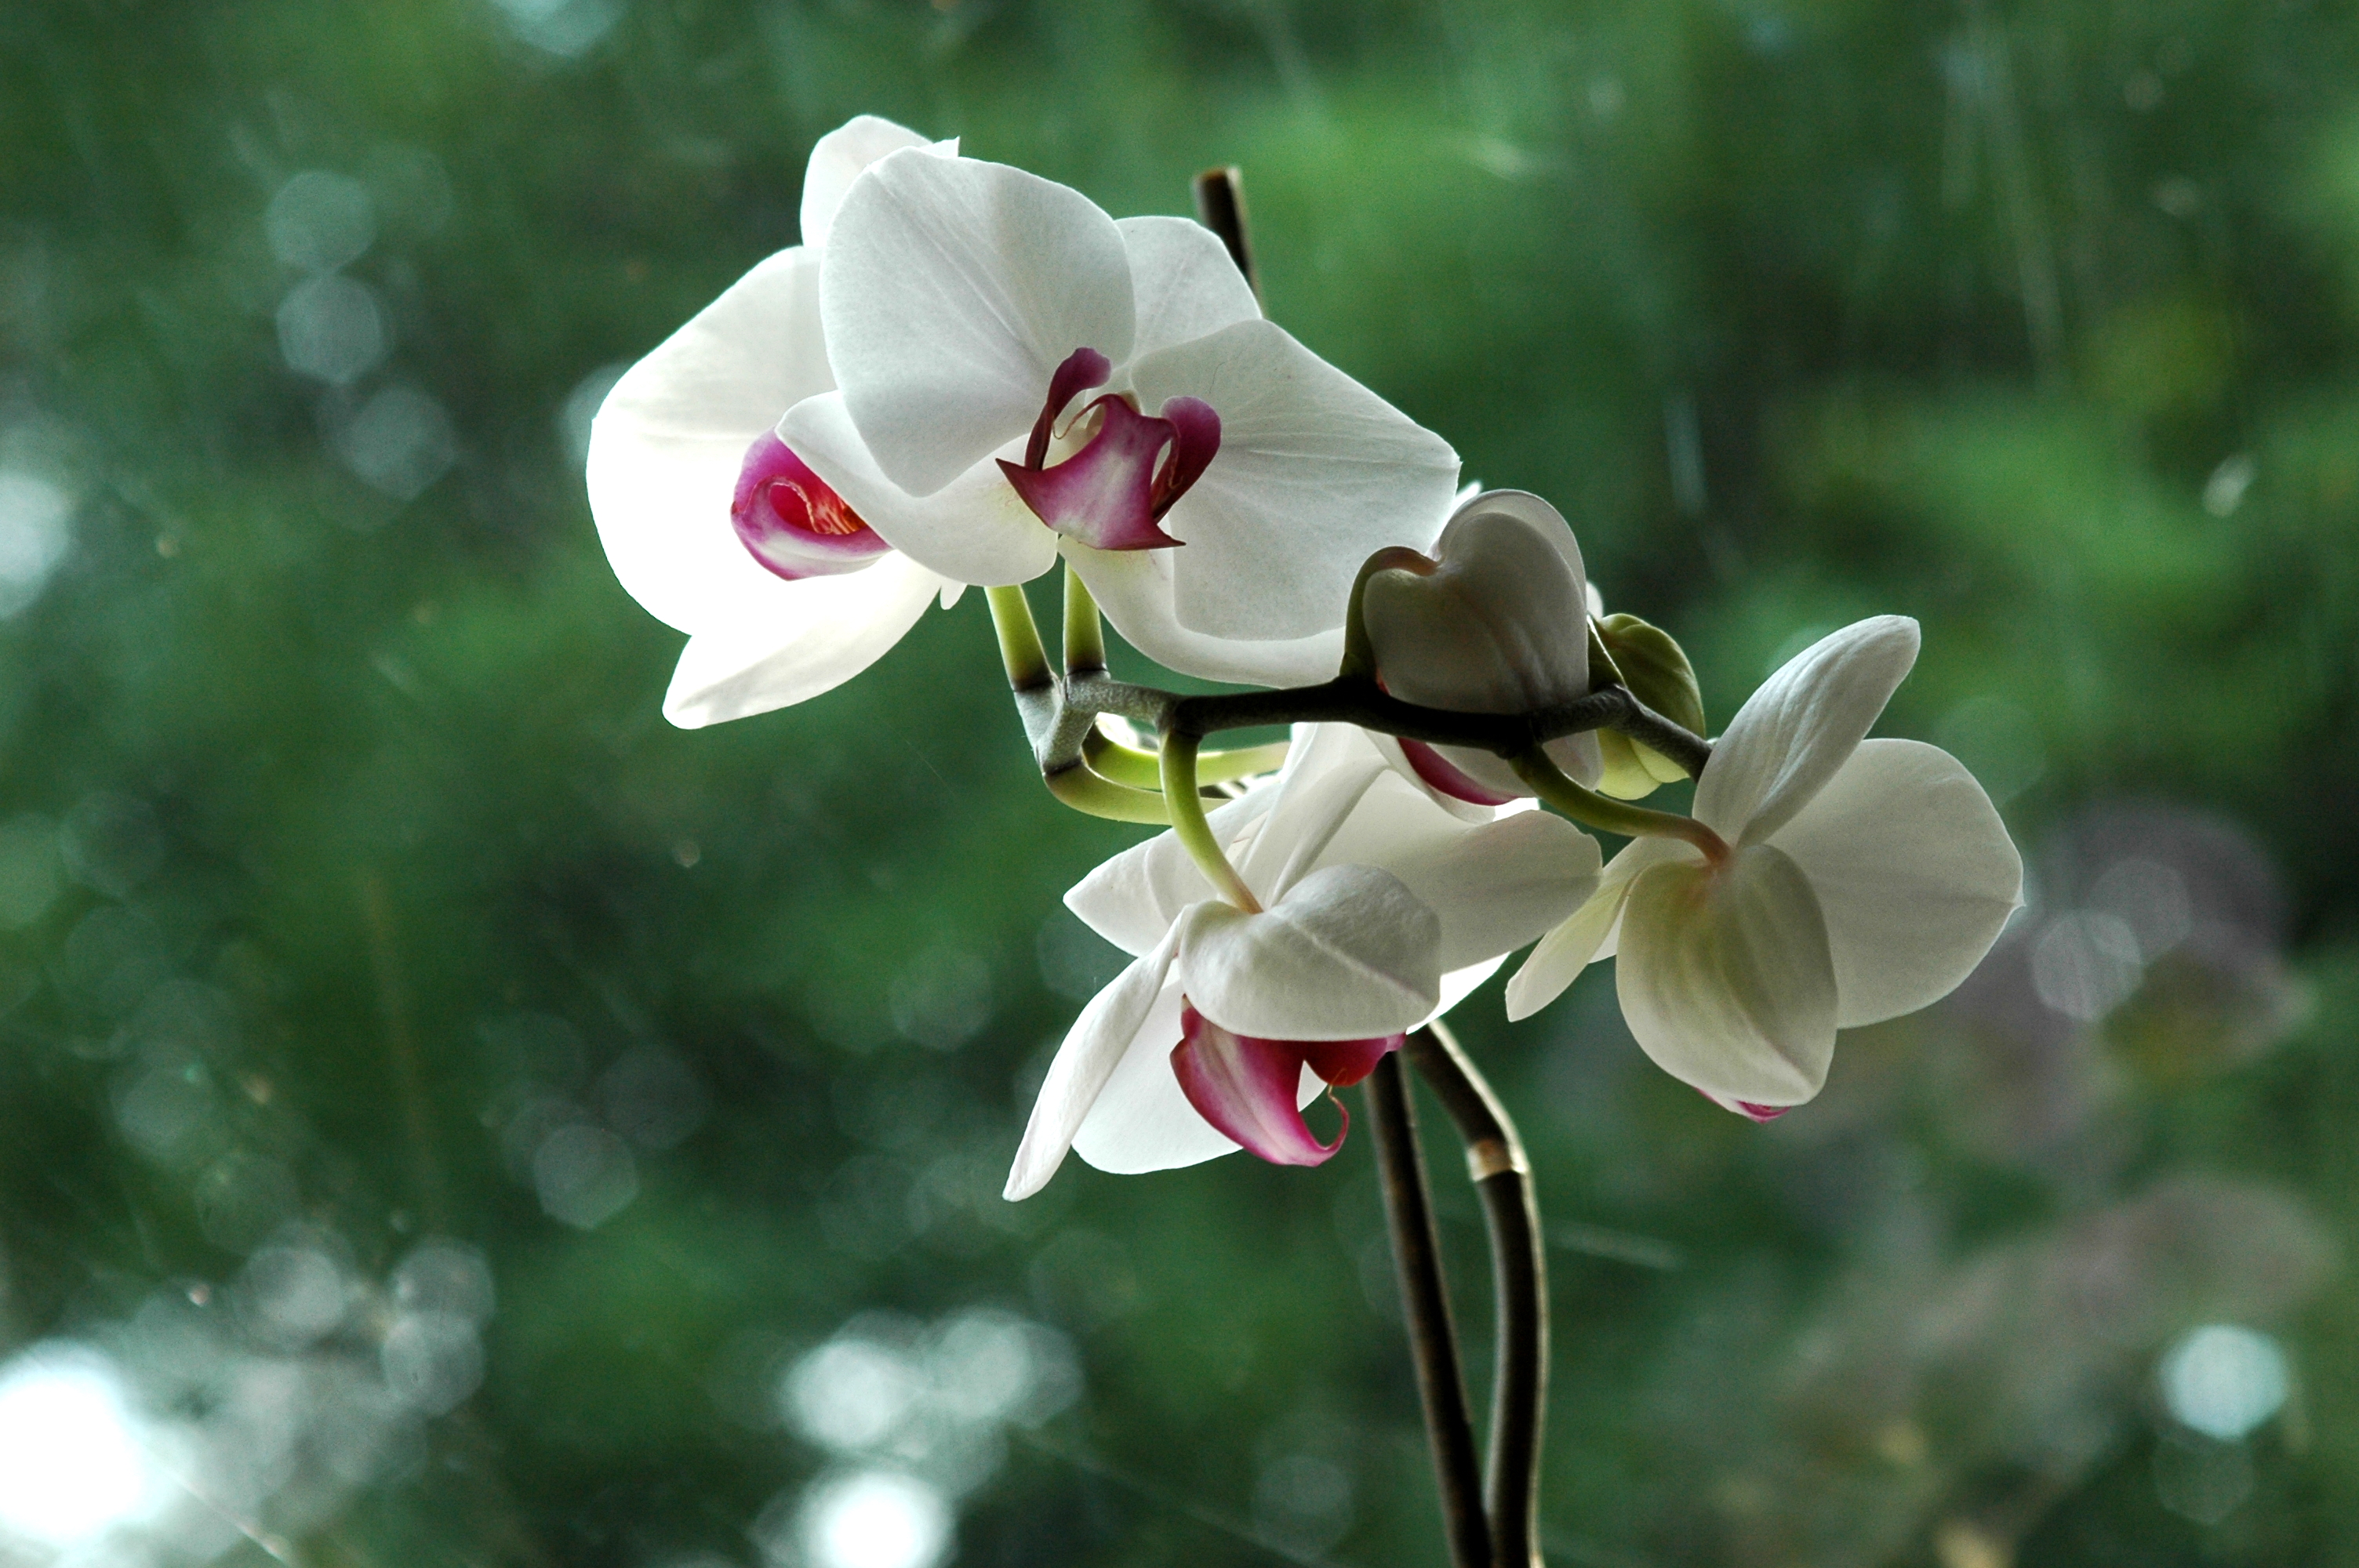 Learn how to grow, care for orchids